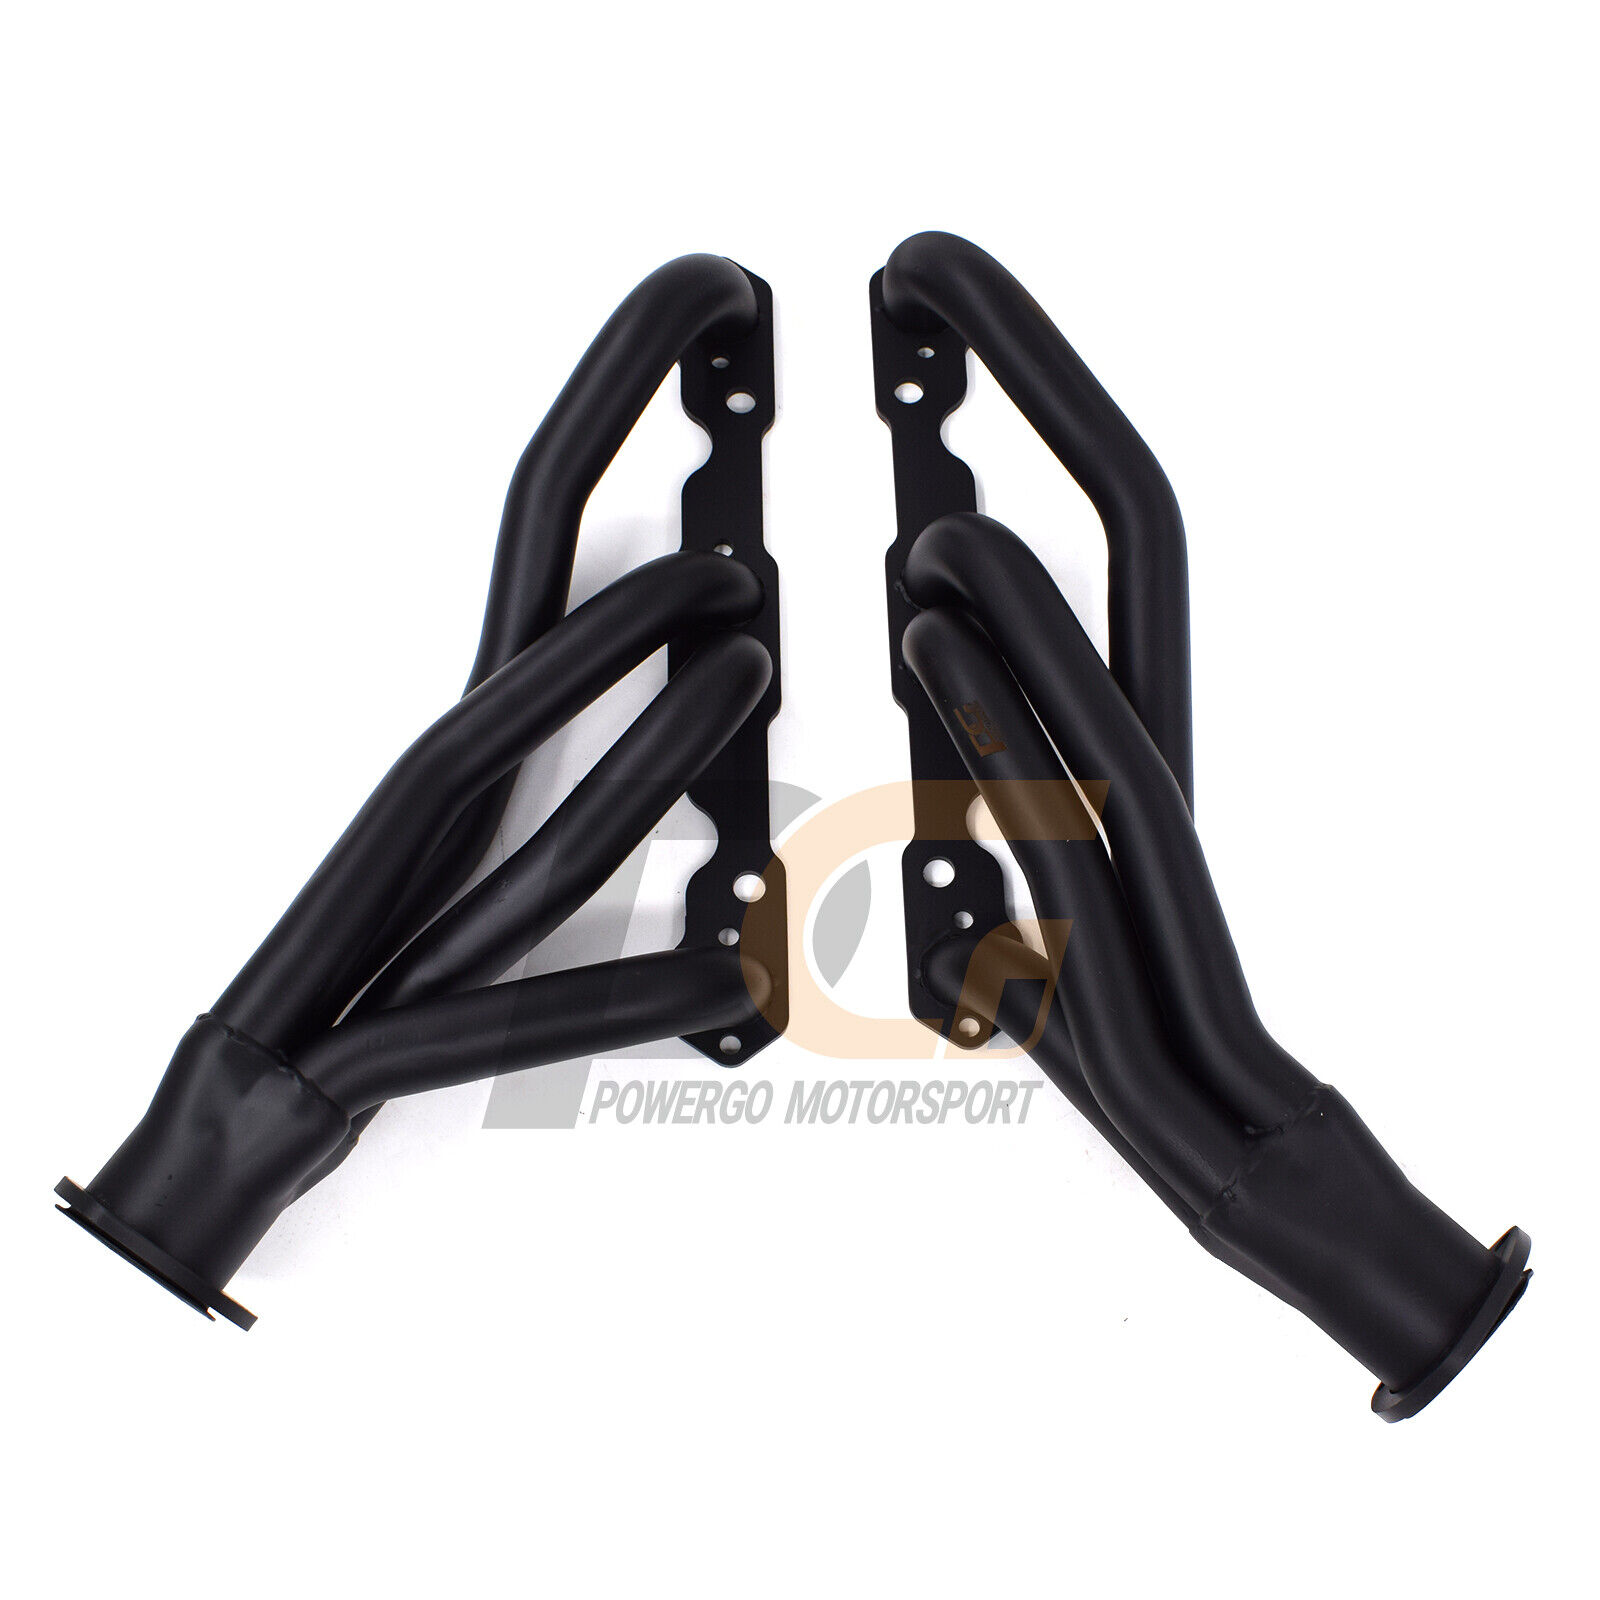 Shorty Headers for Chevy 65-90 Caprice Impala Bel Air Biscayne Small Block V8